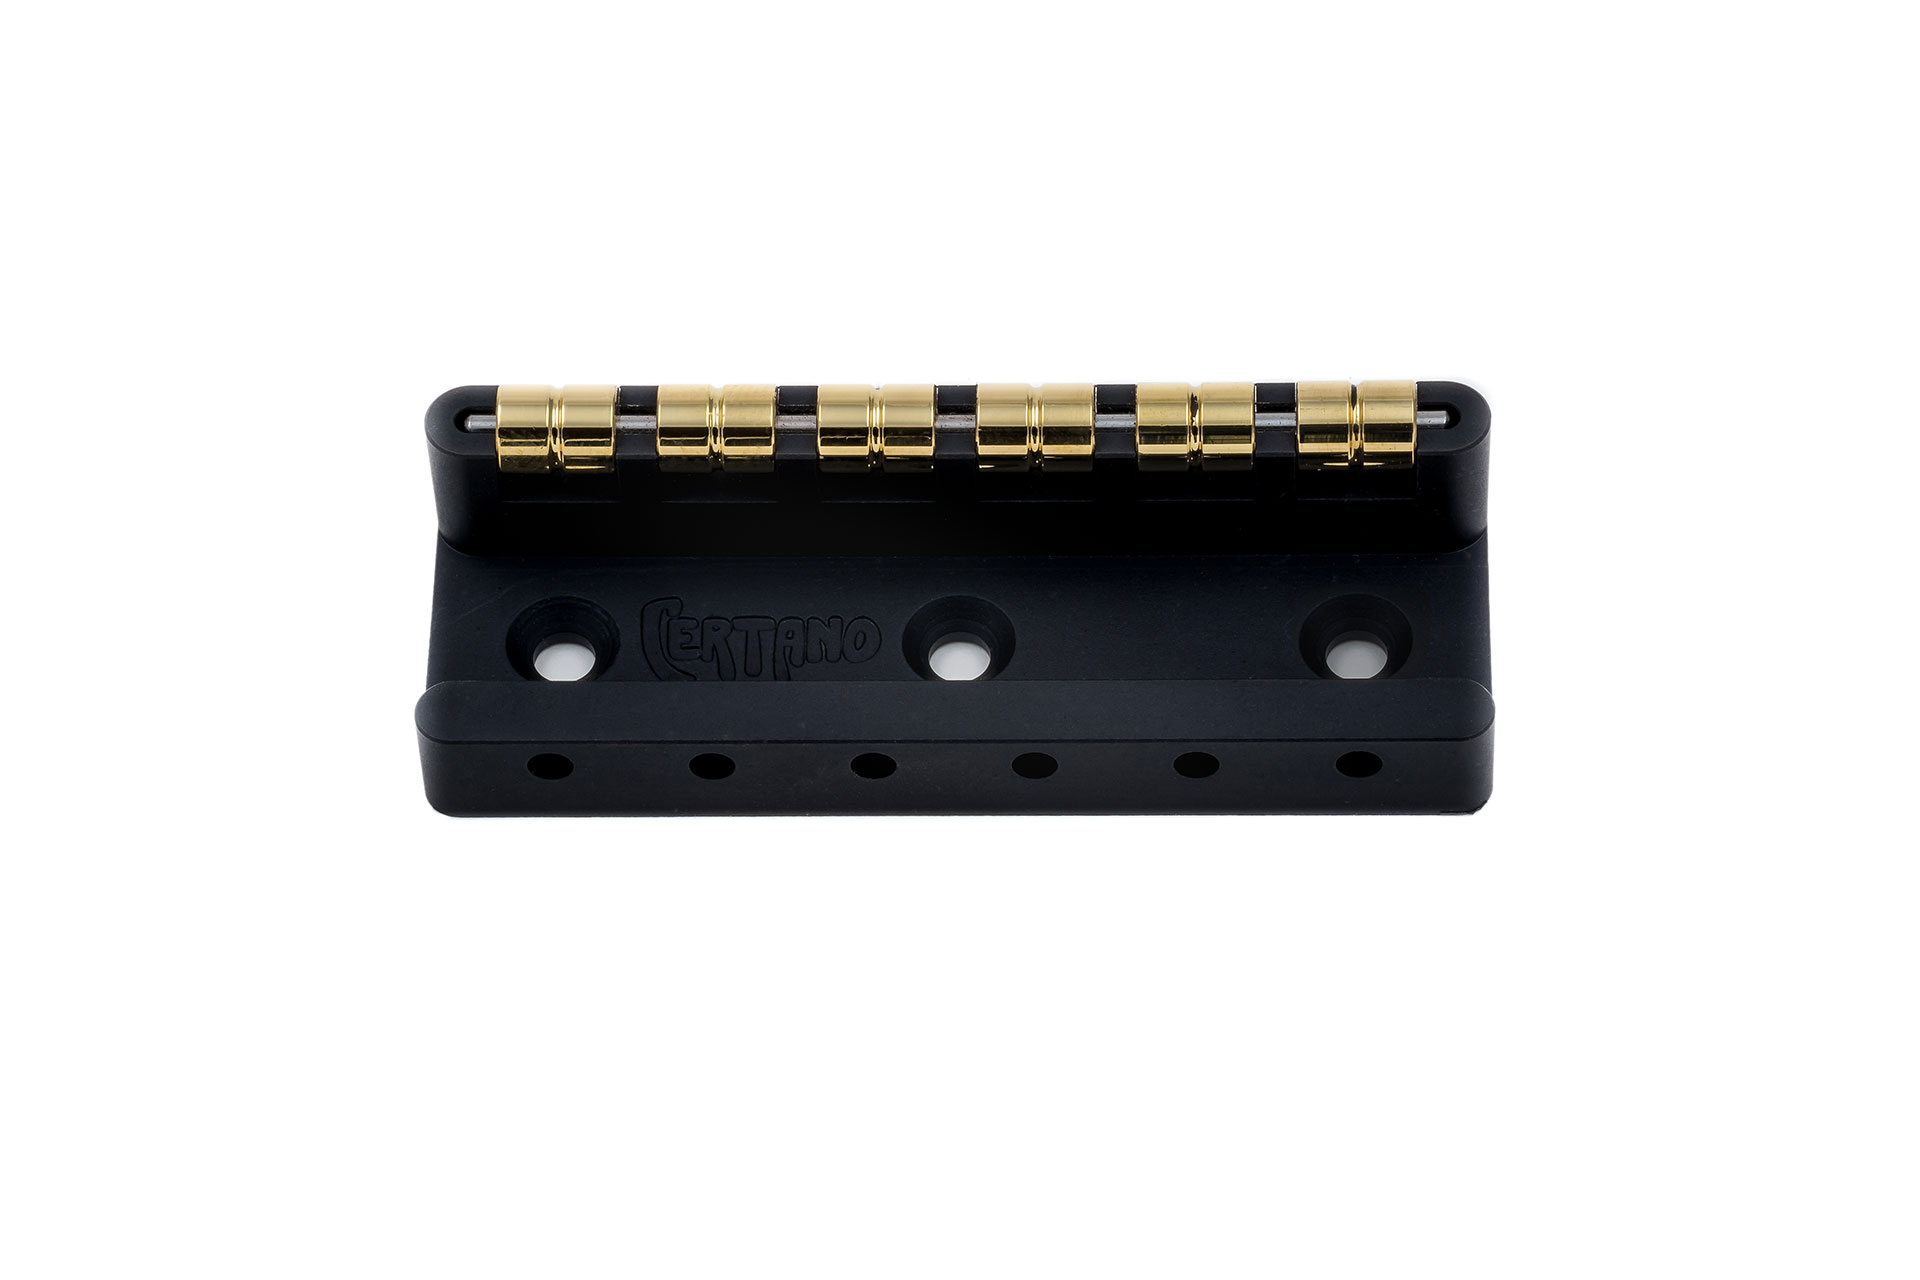 Bridge "R.R.B.1" Black Version - Ideal for your lap steel fabrication projects